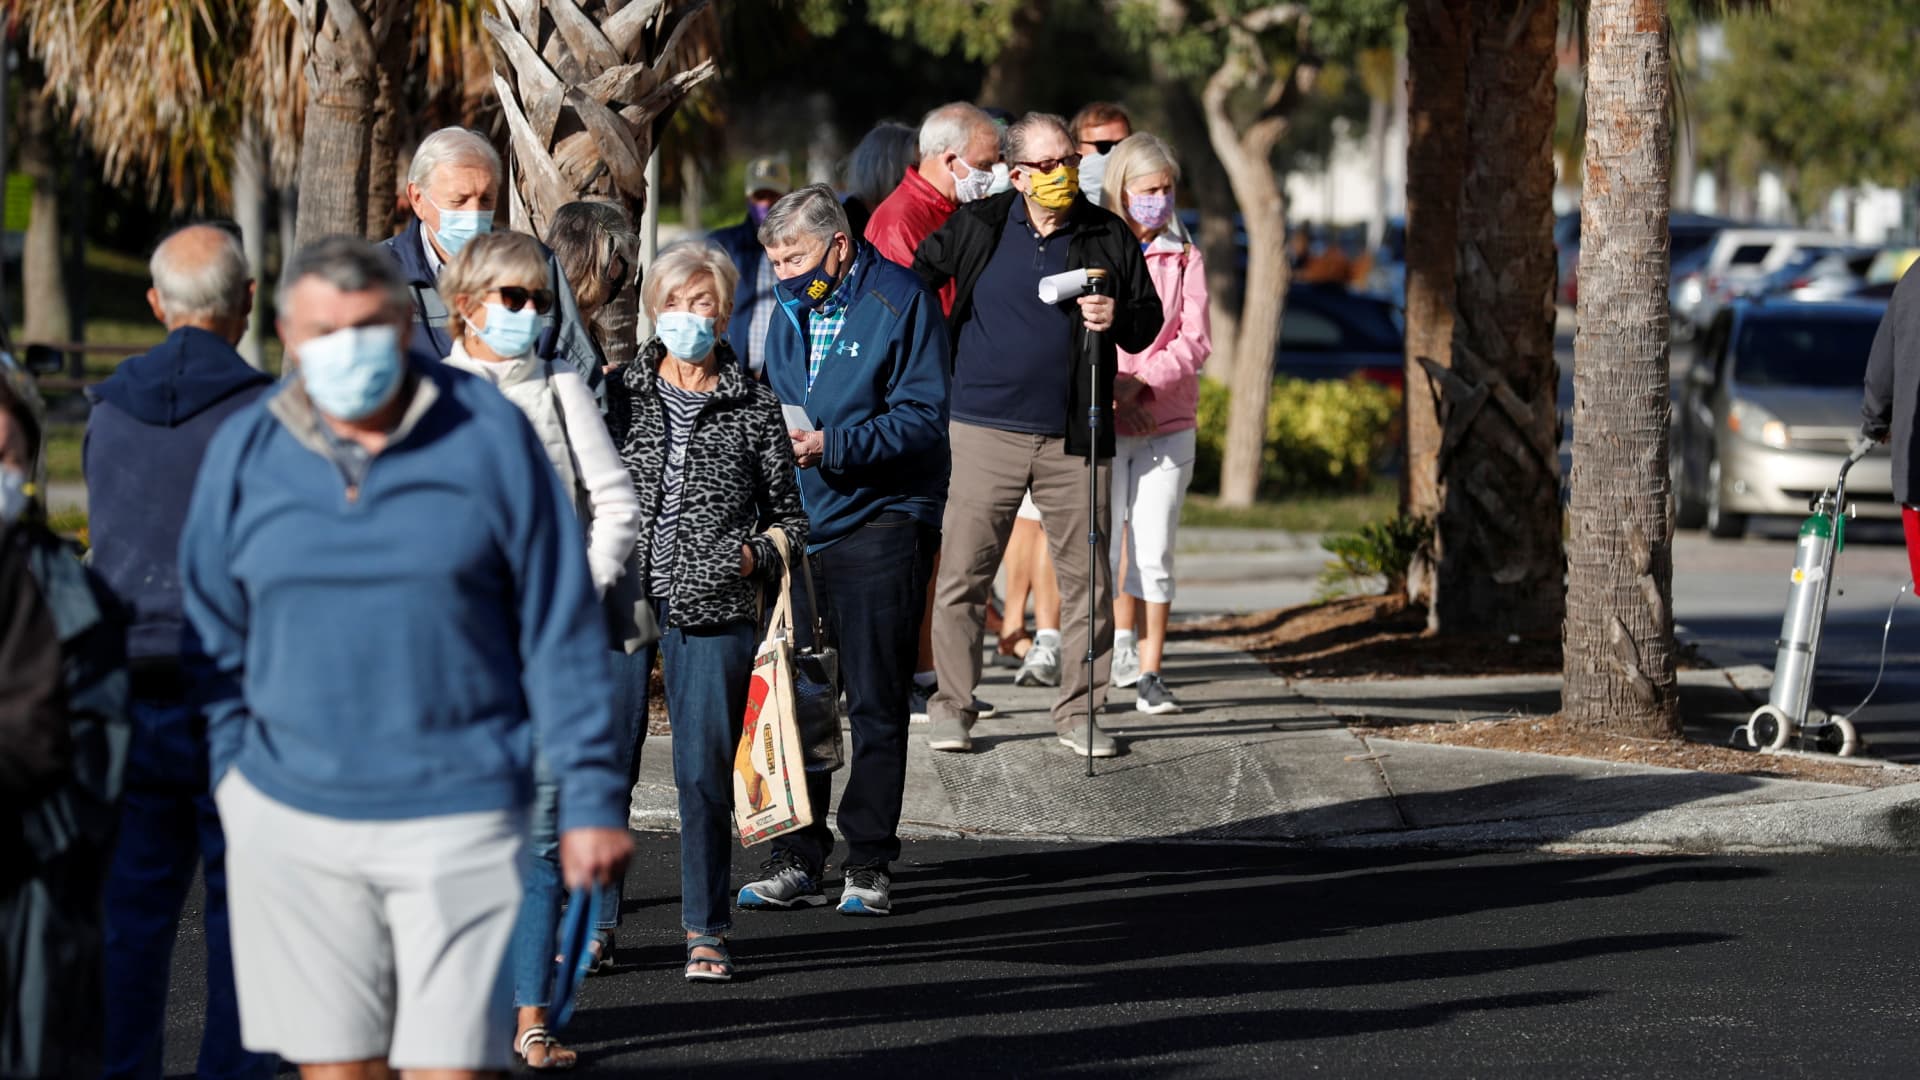 Seniors, who are 65 and over, wait in line at the Department of Health Sarasota COVID-19 Vaccination Clinic in Sarasota, Florida, January 4, 2021.